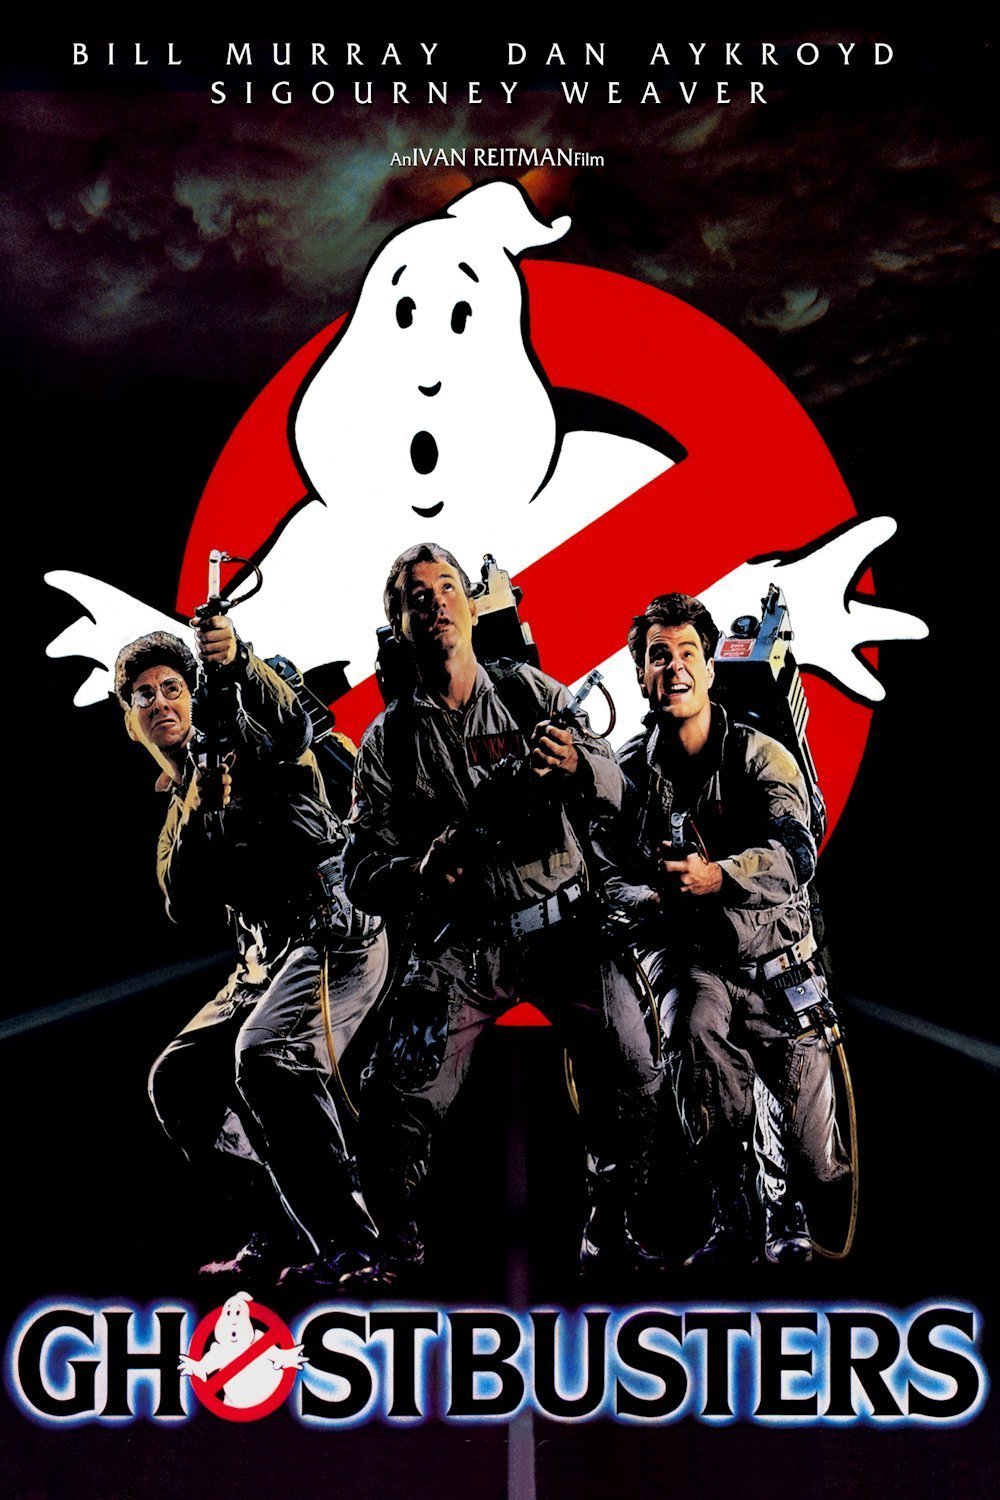 ghostbusters stars